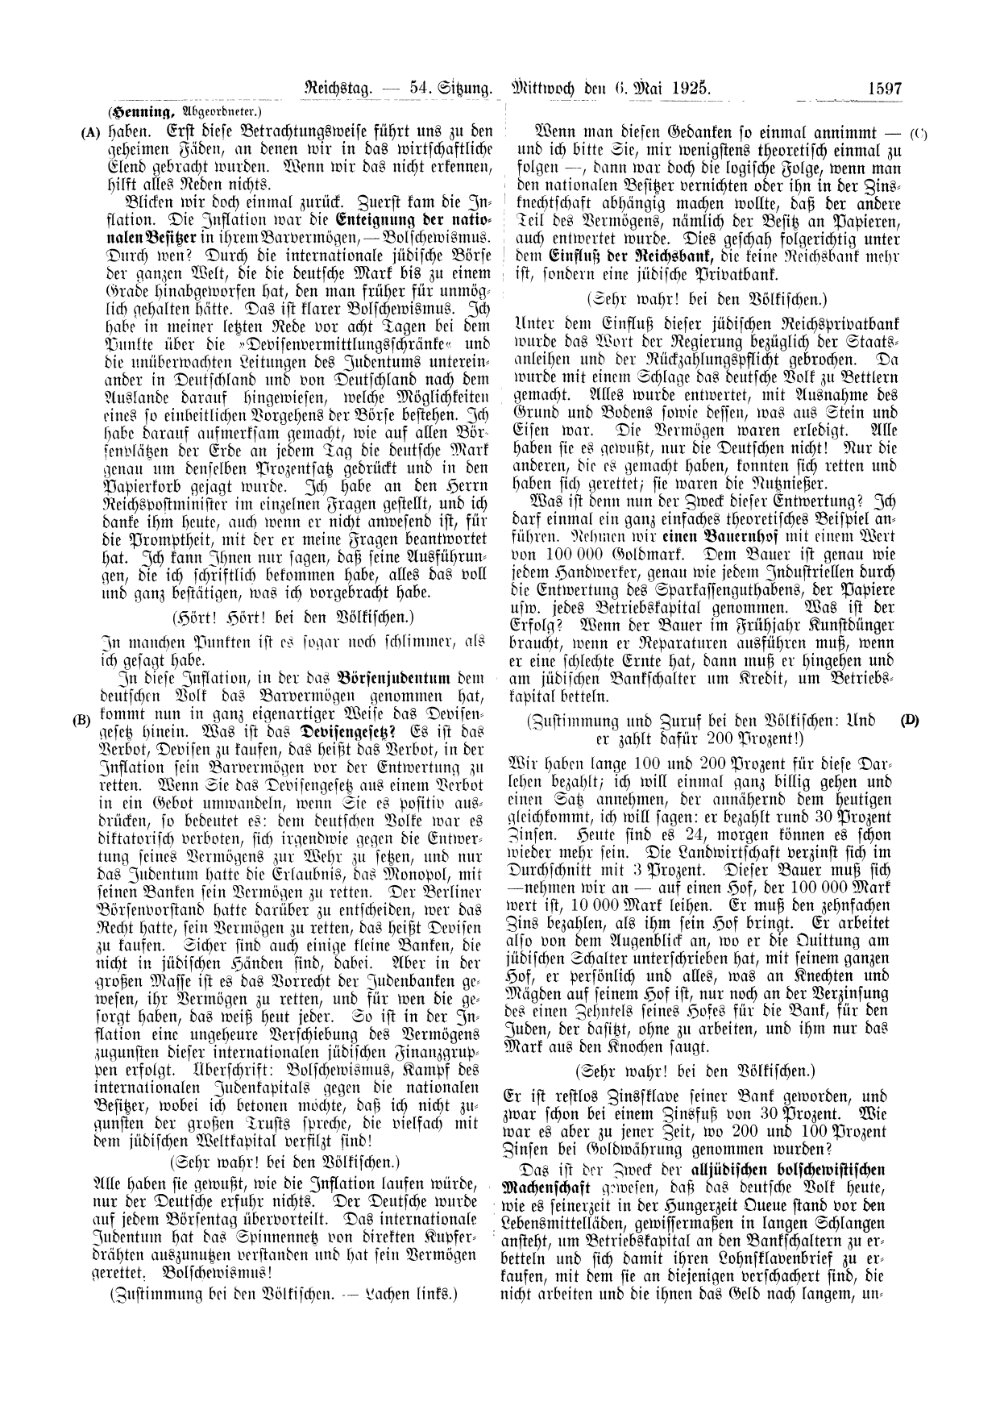 Scan of page 1597